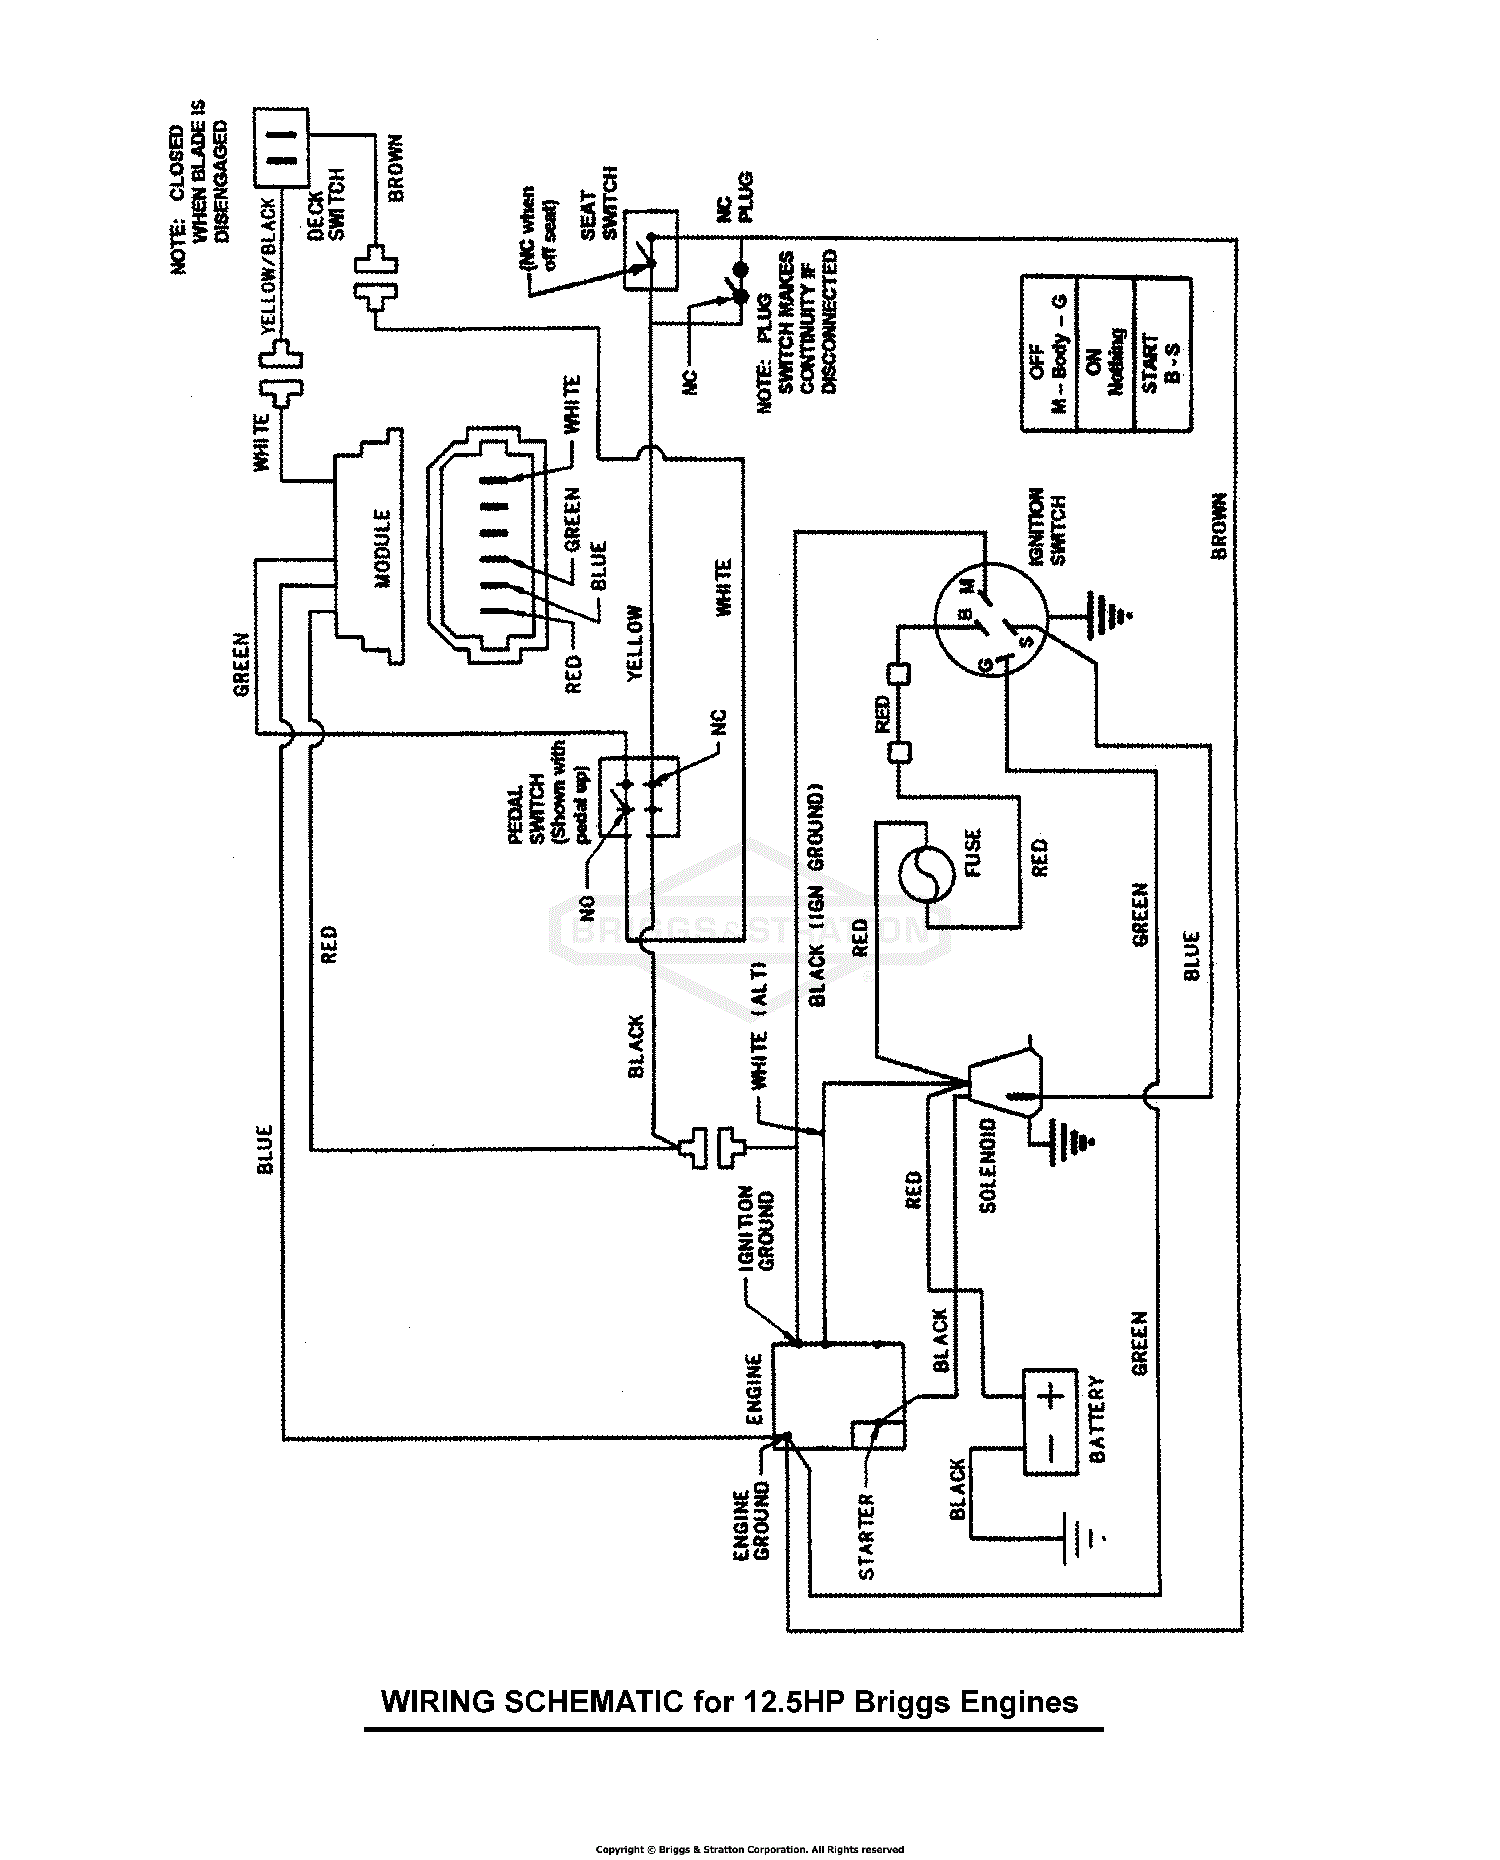 Briggs And Stratton 12 5 Hp Wiring Diagram Wiring Diagrams Source